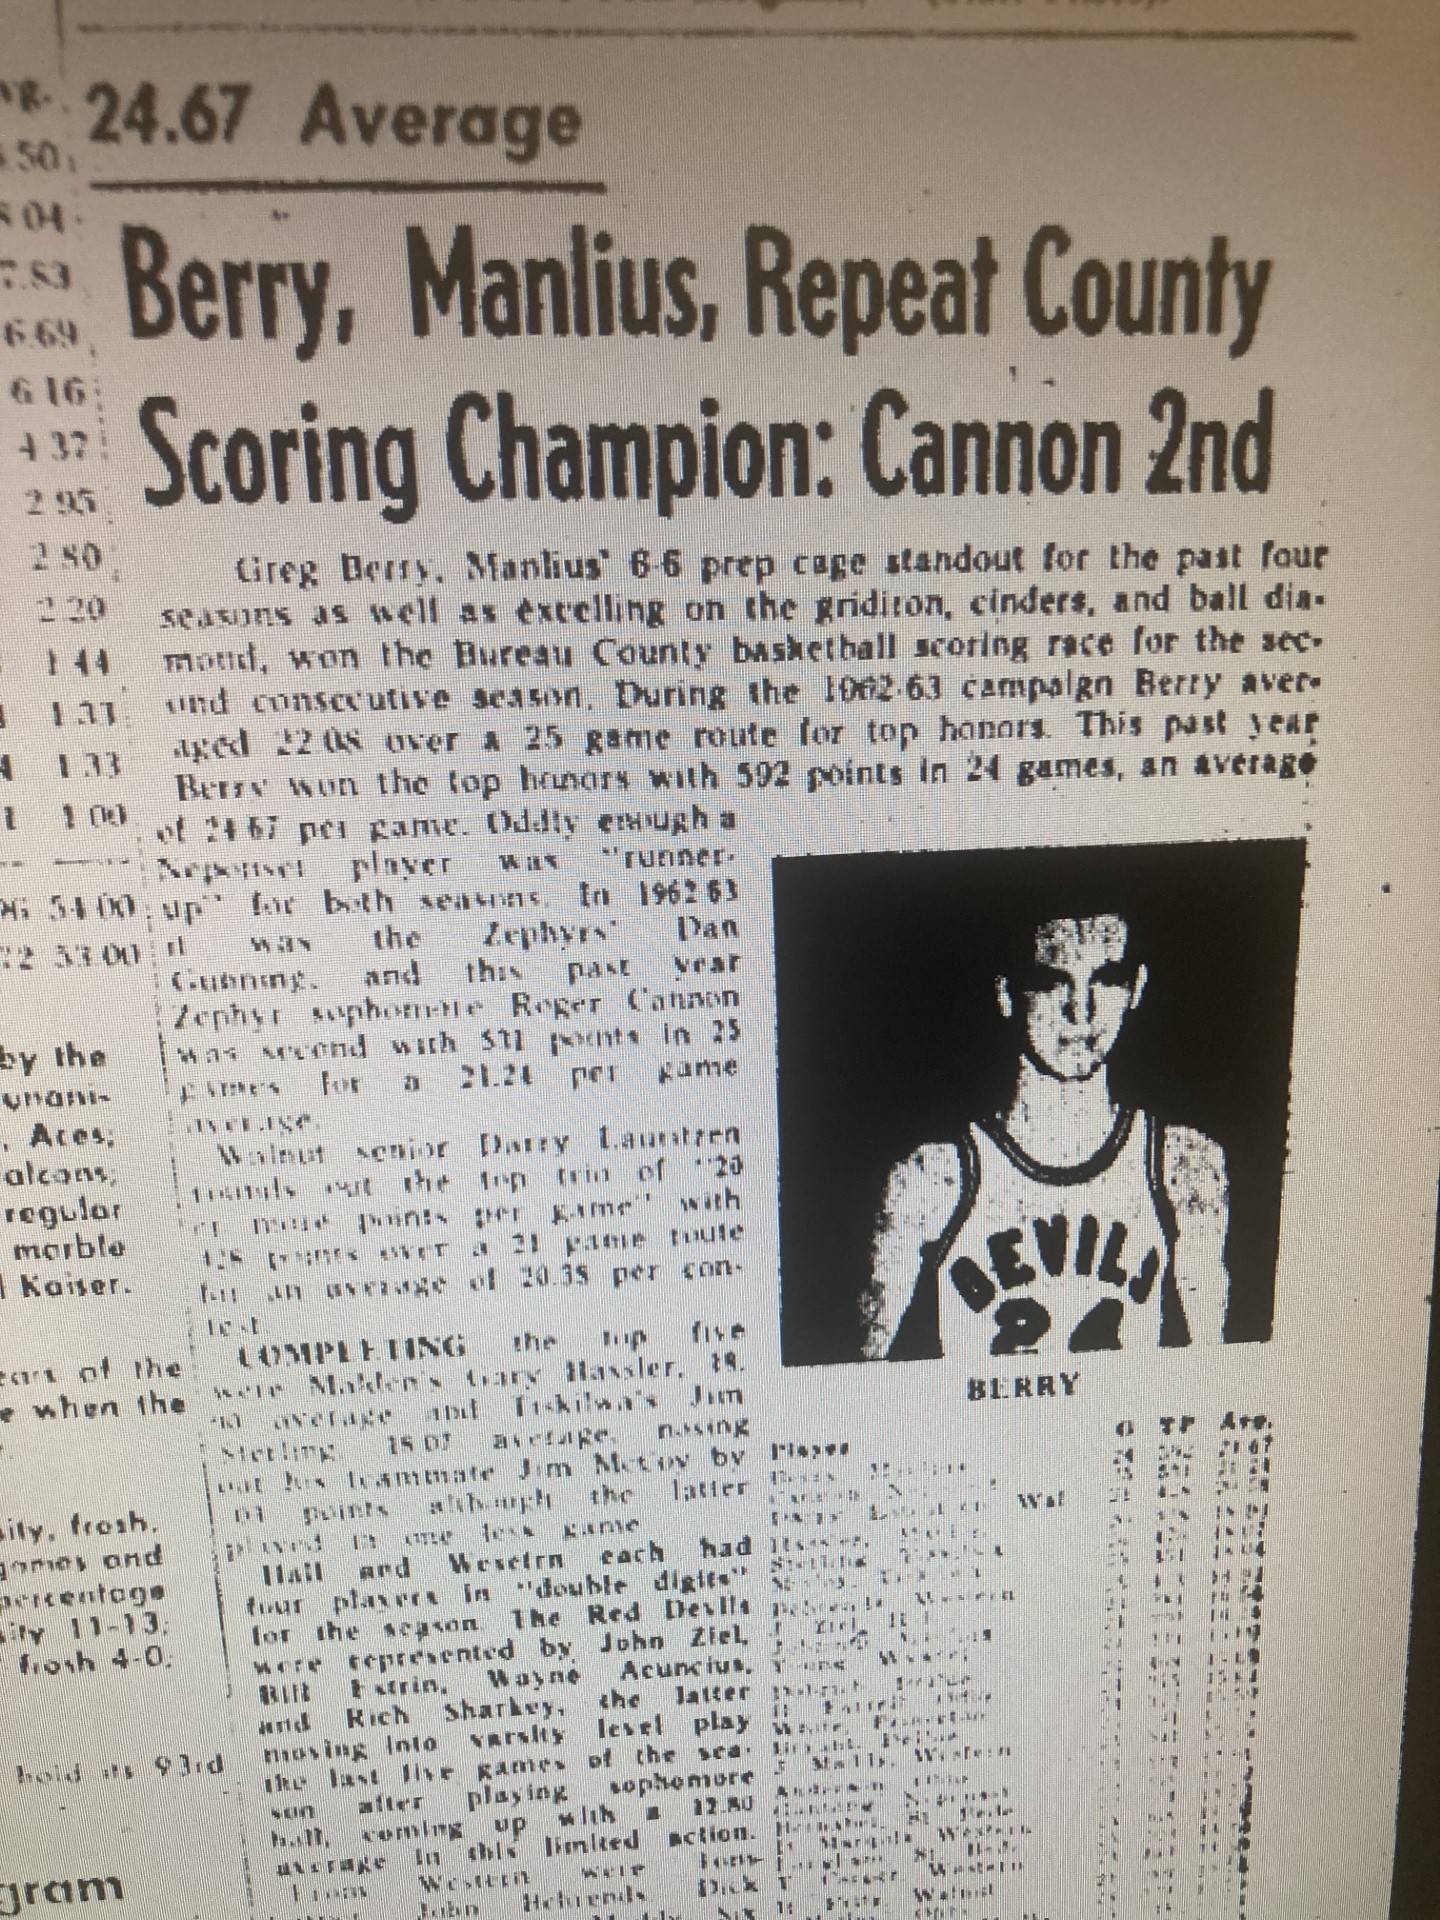 Greg Berry was the Bureau County leading scorer during the 1963-64 season (also in 1962-63) as shown in this BCR clipping in 1964. Berry passed away Sunday, Feb. 4 in Las Cruces, New Mexico.